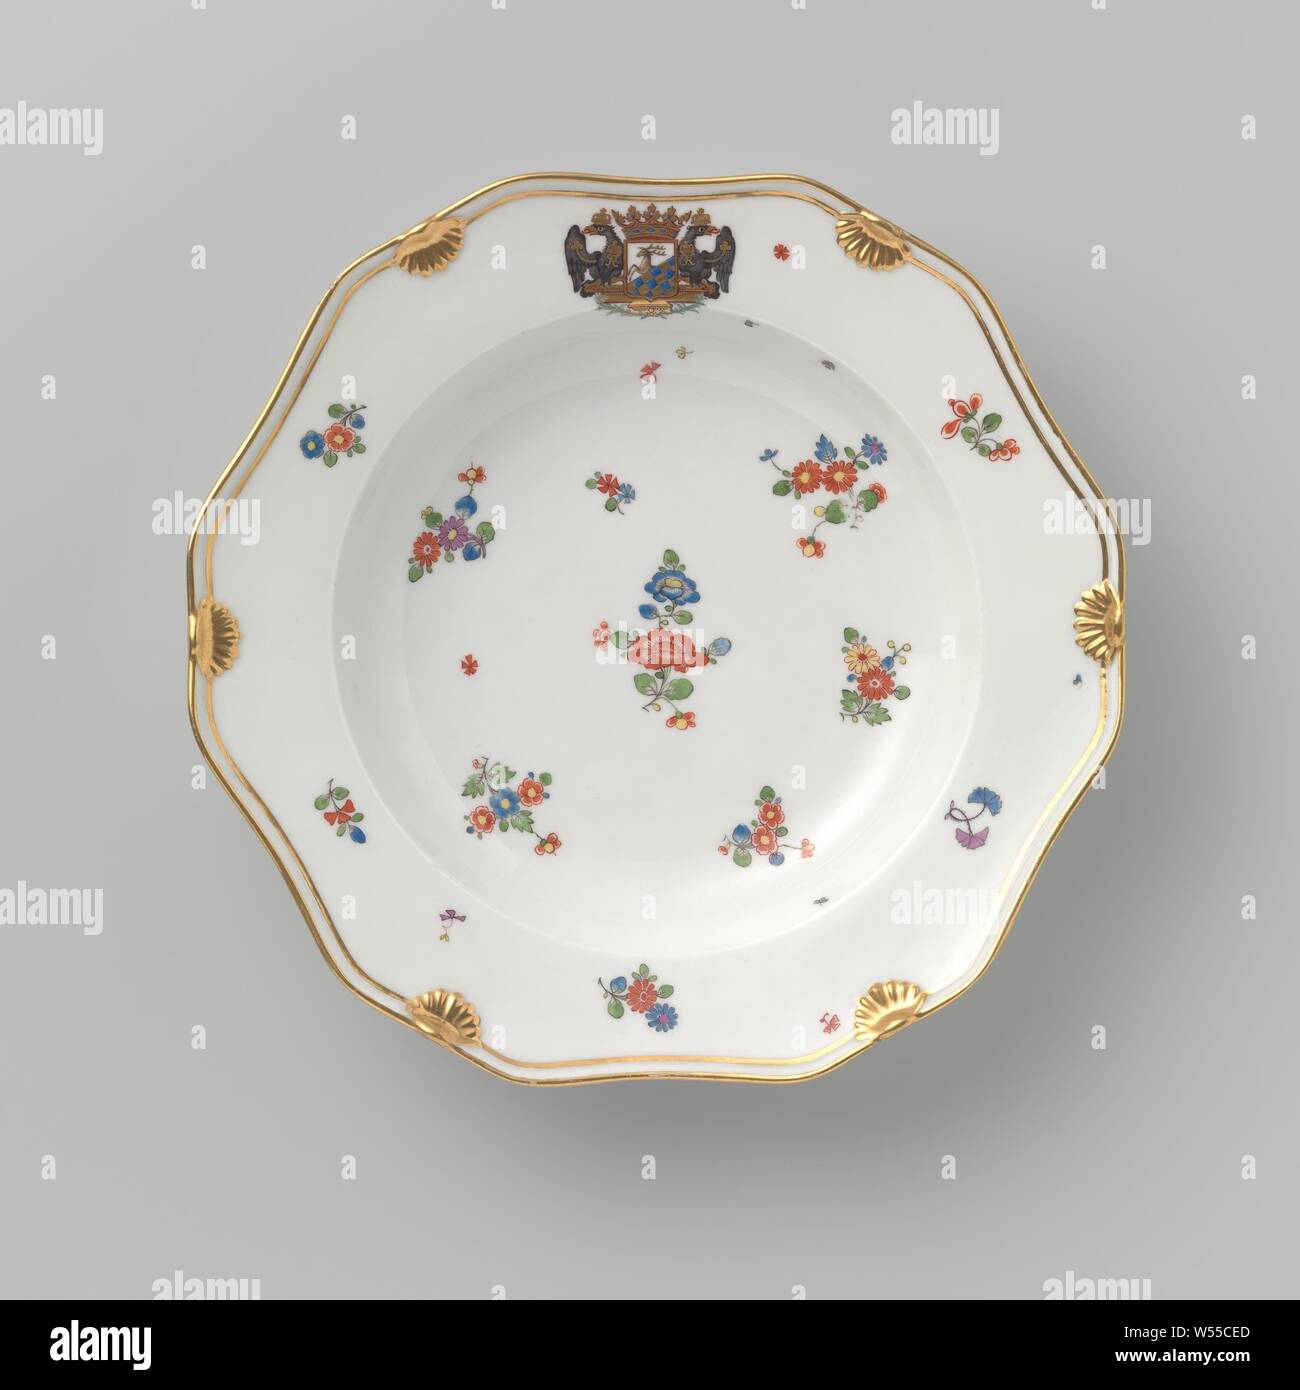 Plate with the coat of ams or Count Heinrich of Podewils and flower sprays, 12-sided porcelain plate, painted on the glaze in blue, red, pink, green, yellow, black and gold. On the shelf, the wall and the border flower branches and scatter flowers in the style of the Japanese Kakiemon porcelain. The crowned weapon of Count Heinrich von Podewils (1695-1760) on the rim. Along the edge a double golden line interrupted by six shell motifs. The rear with four scatter flowers. Marked on the bottom with the scepter and number 23., Königliche Porzellan Manufaktur, Berlin, c. 1763 - c. 1800, porcelain Stock Photo